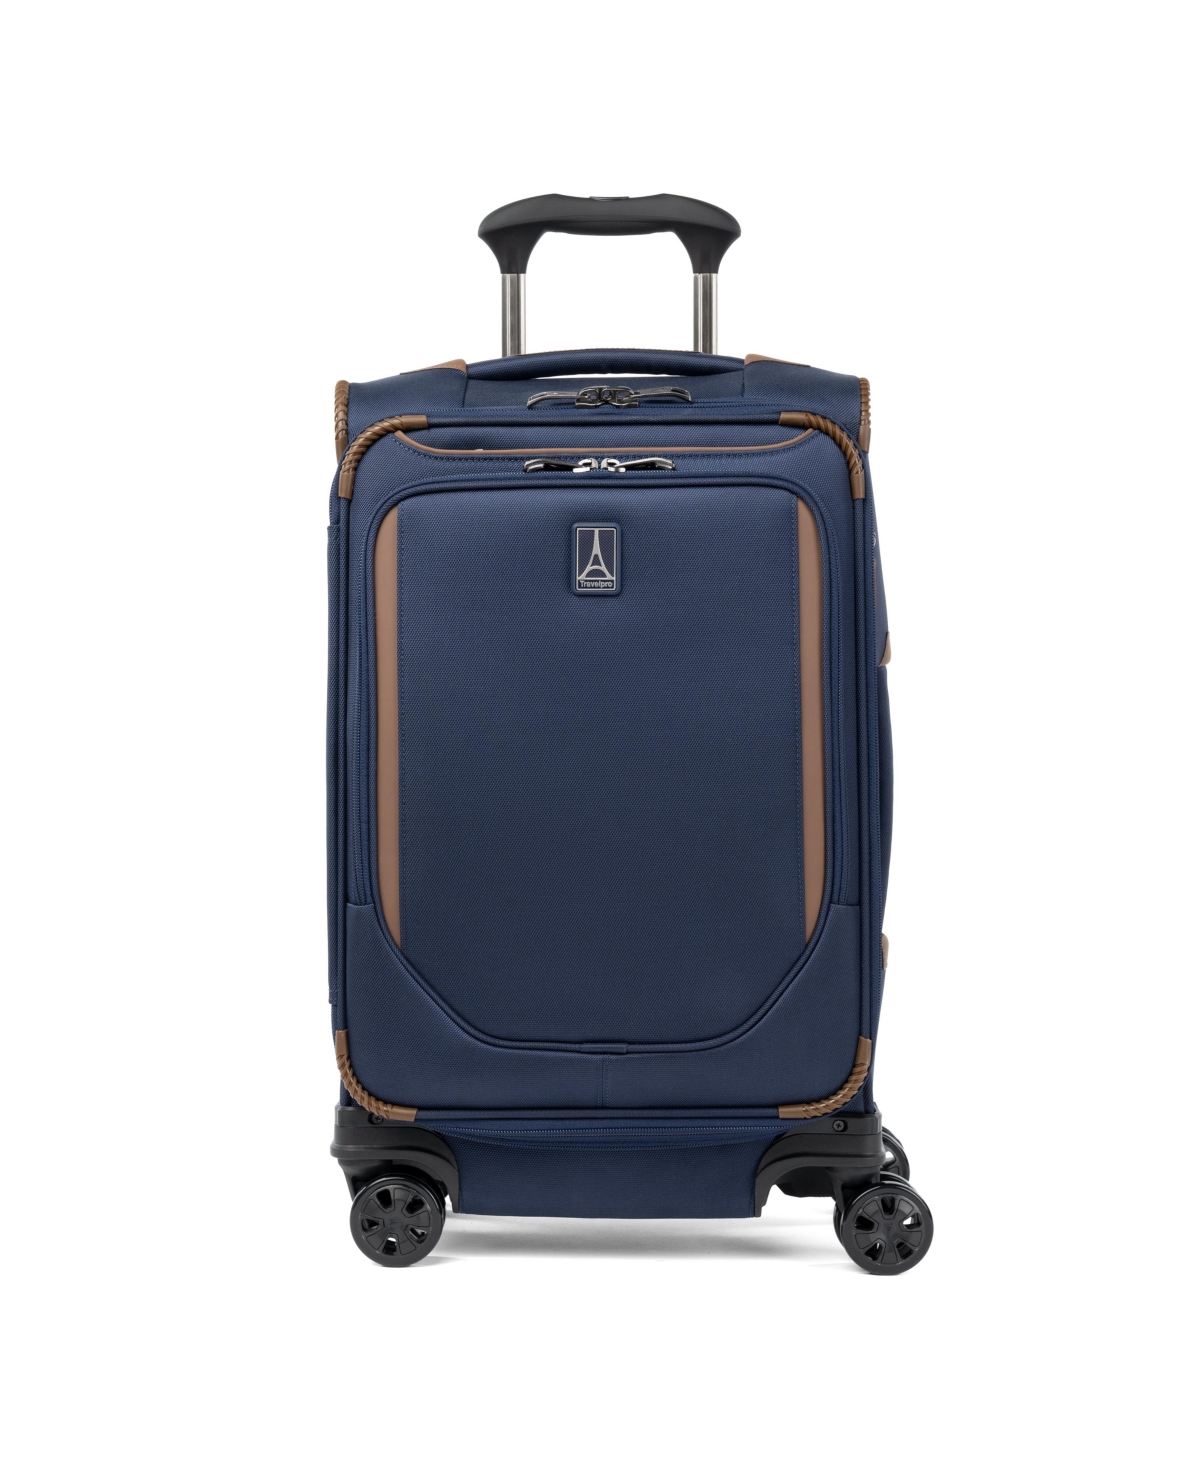 New! Travelpro Crew Classic Carry-on Expandable Spinner Luggage - Patriot Blue